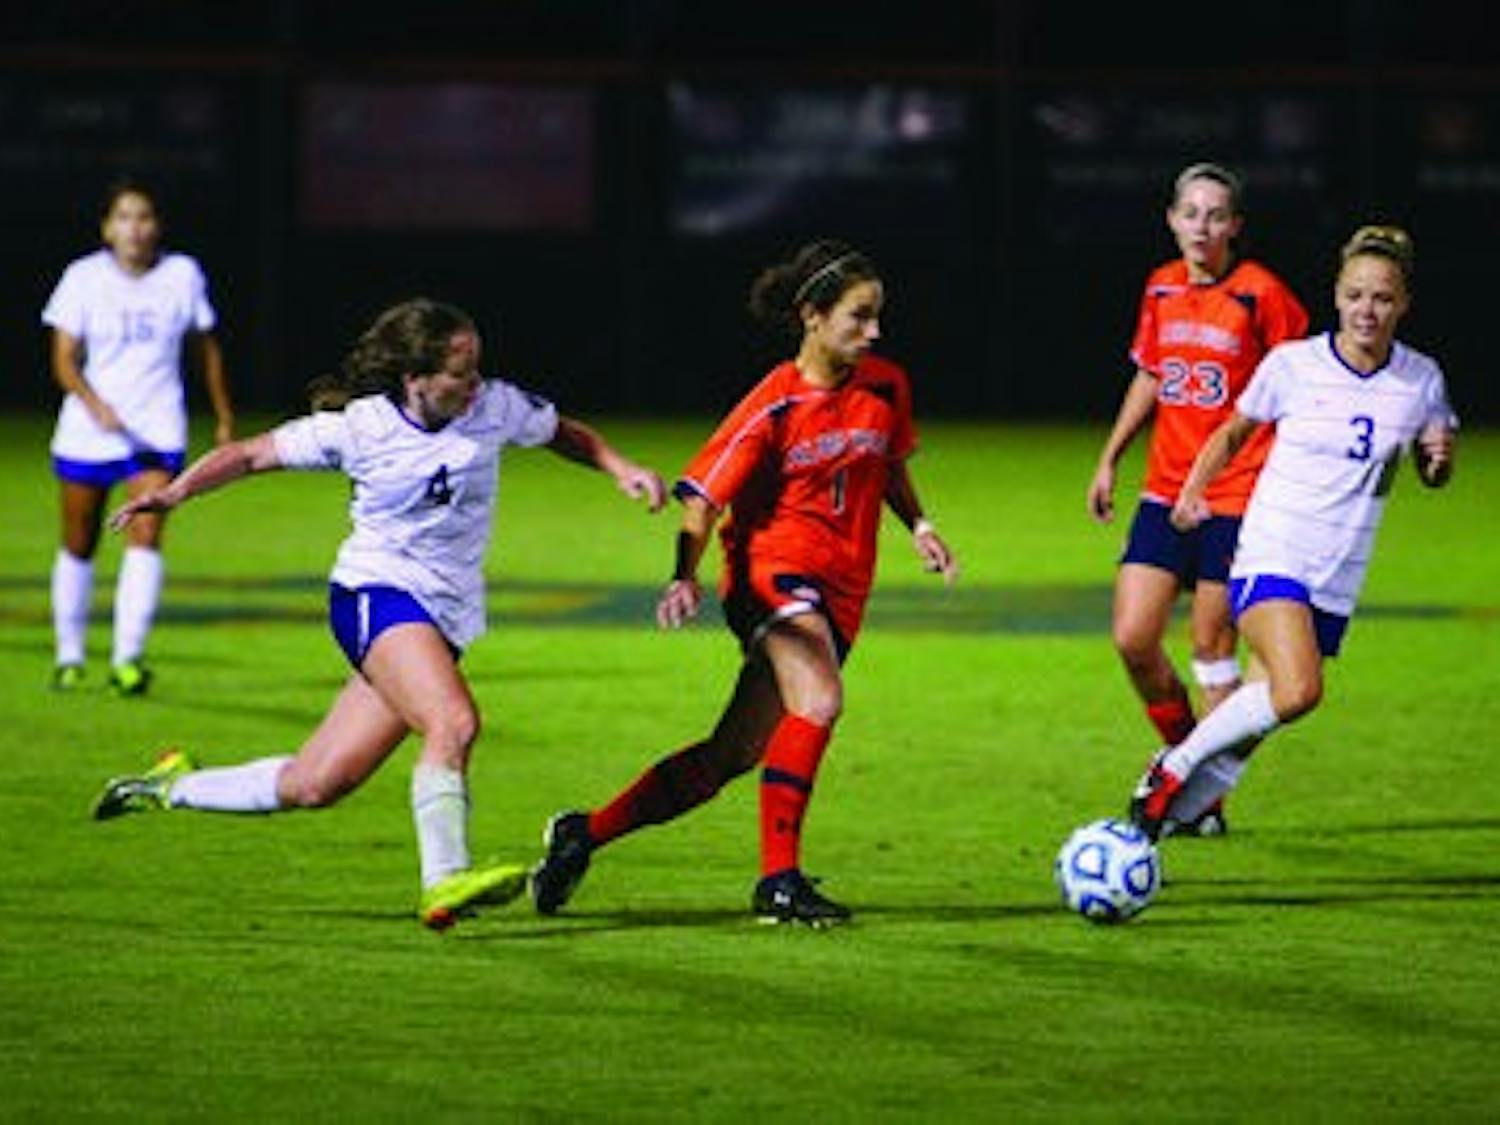 Junior midfielder Ana Cate sprints down the field, keeping possesion from LSU. (Rebecca Croomes / ASSISTANT PHOTO EDITOR)